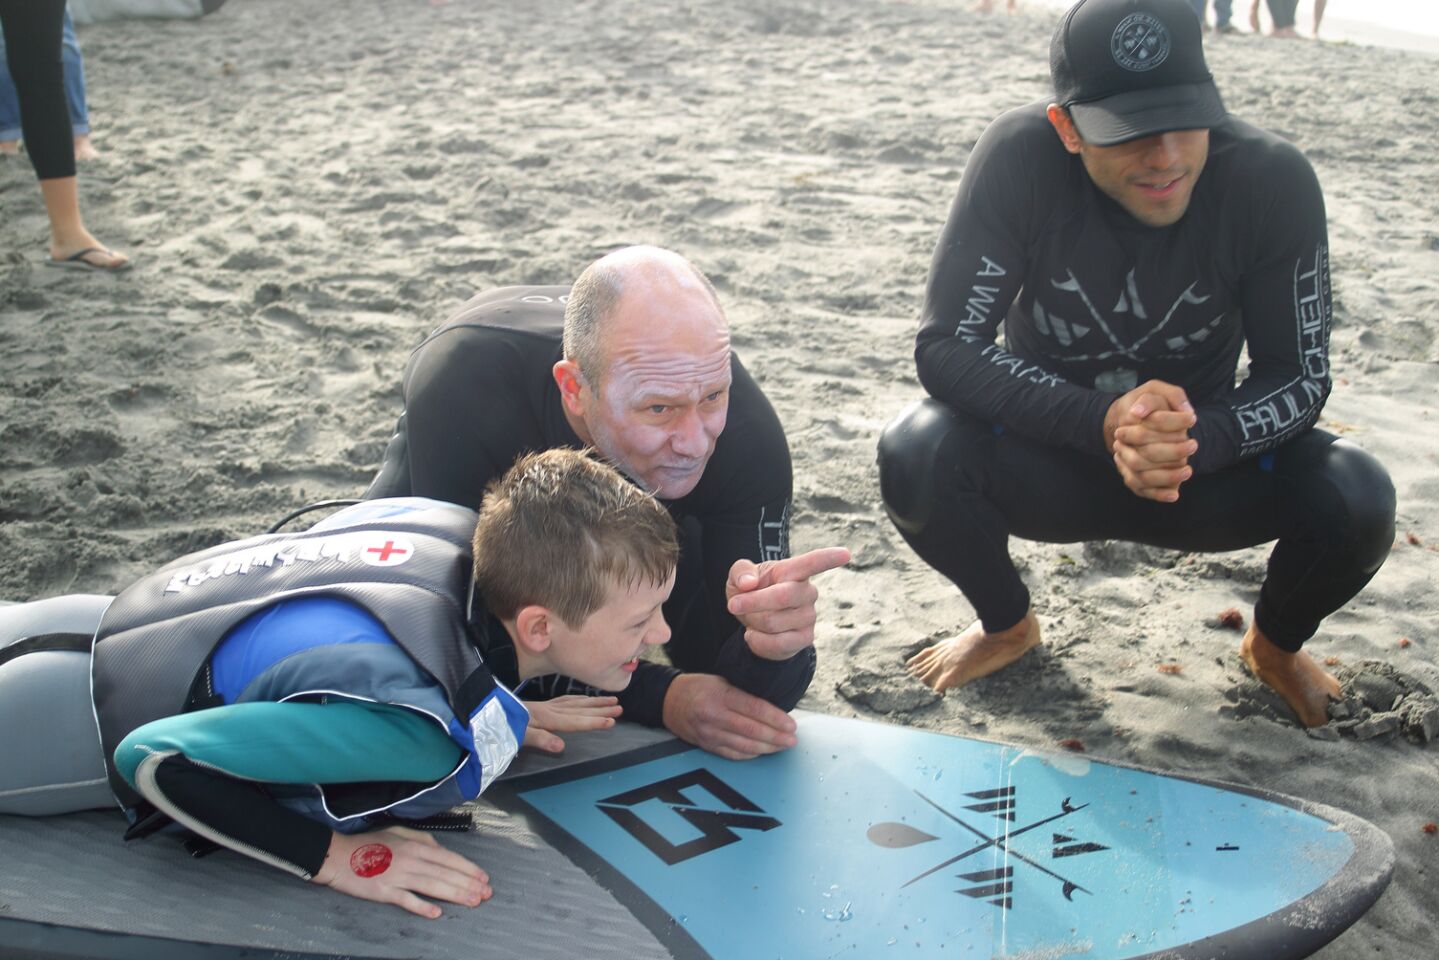 Mike Miller and Raphael Lopez help Brandon practice on shore before going into the water